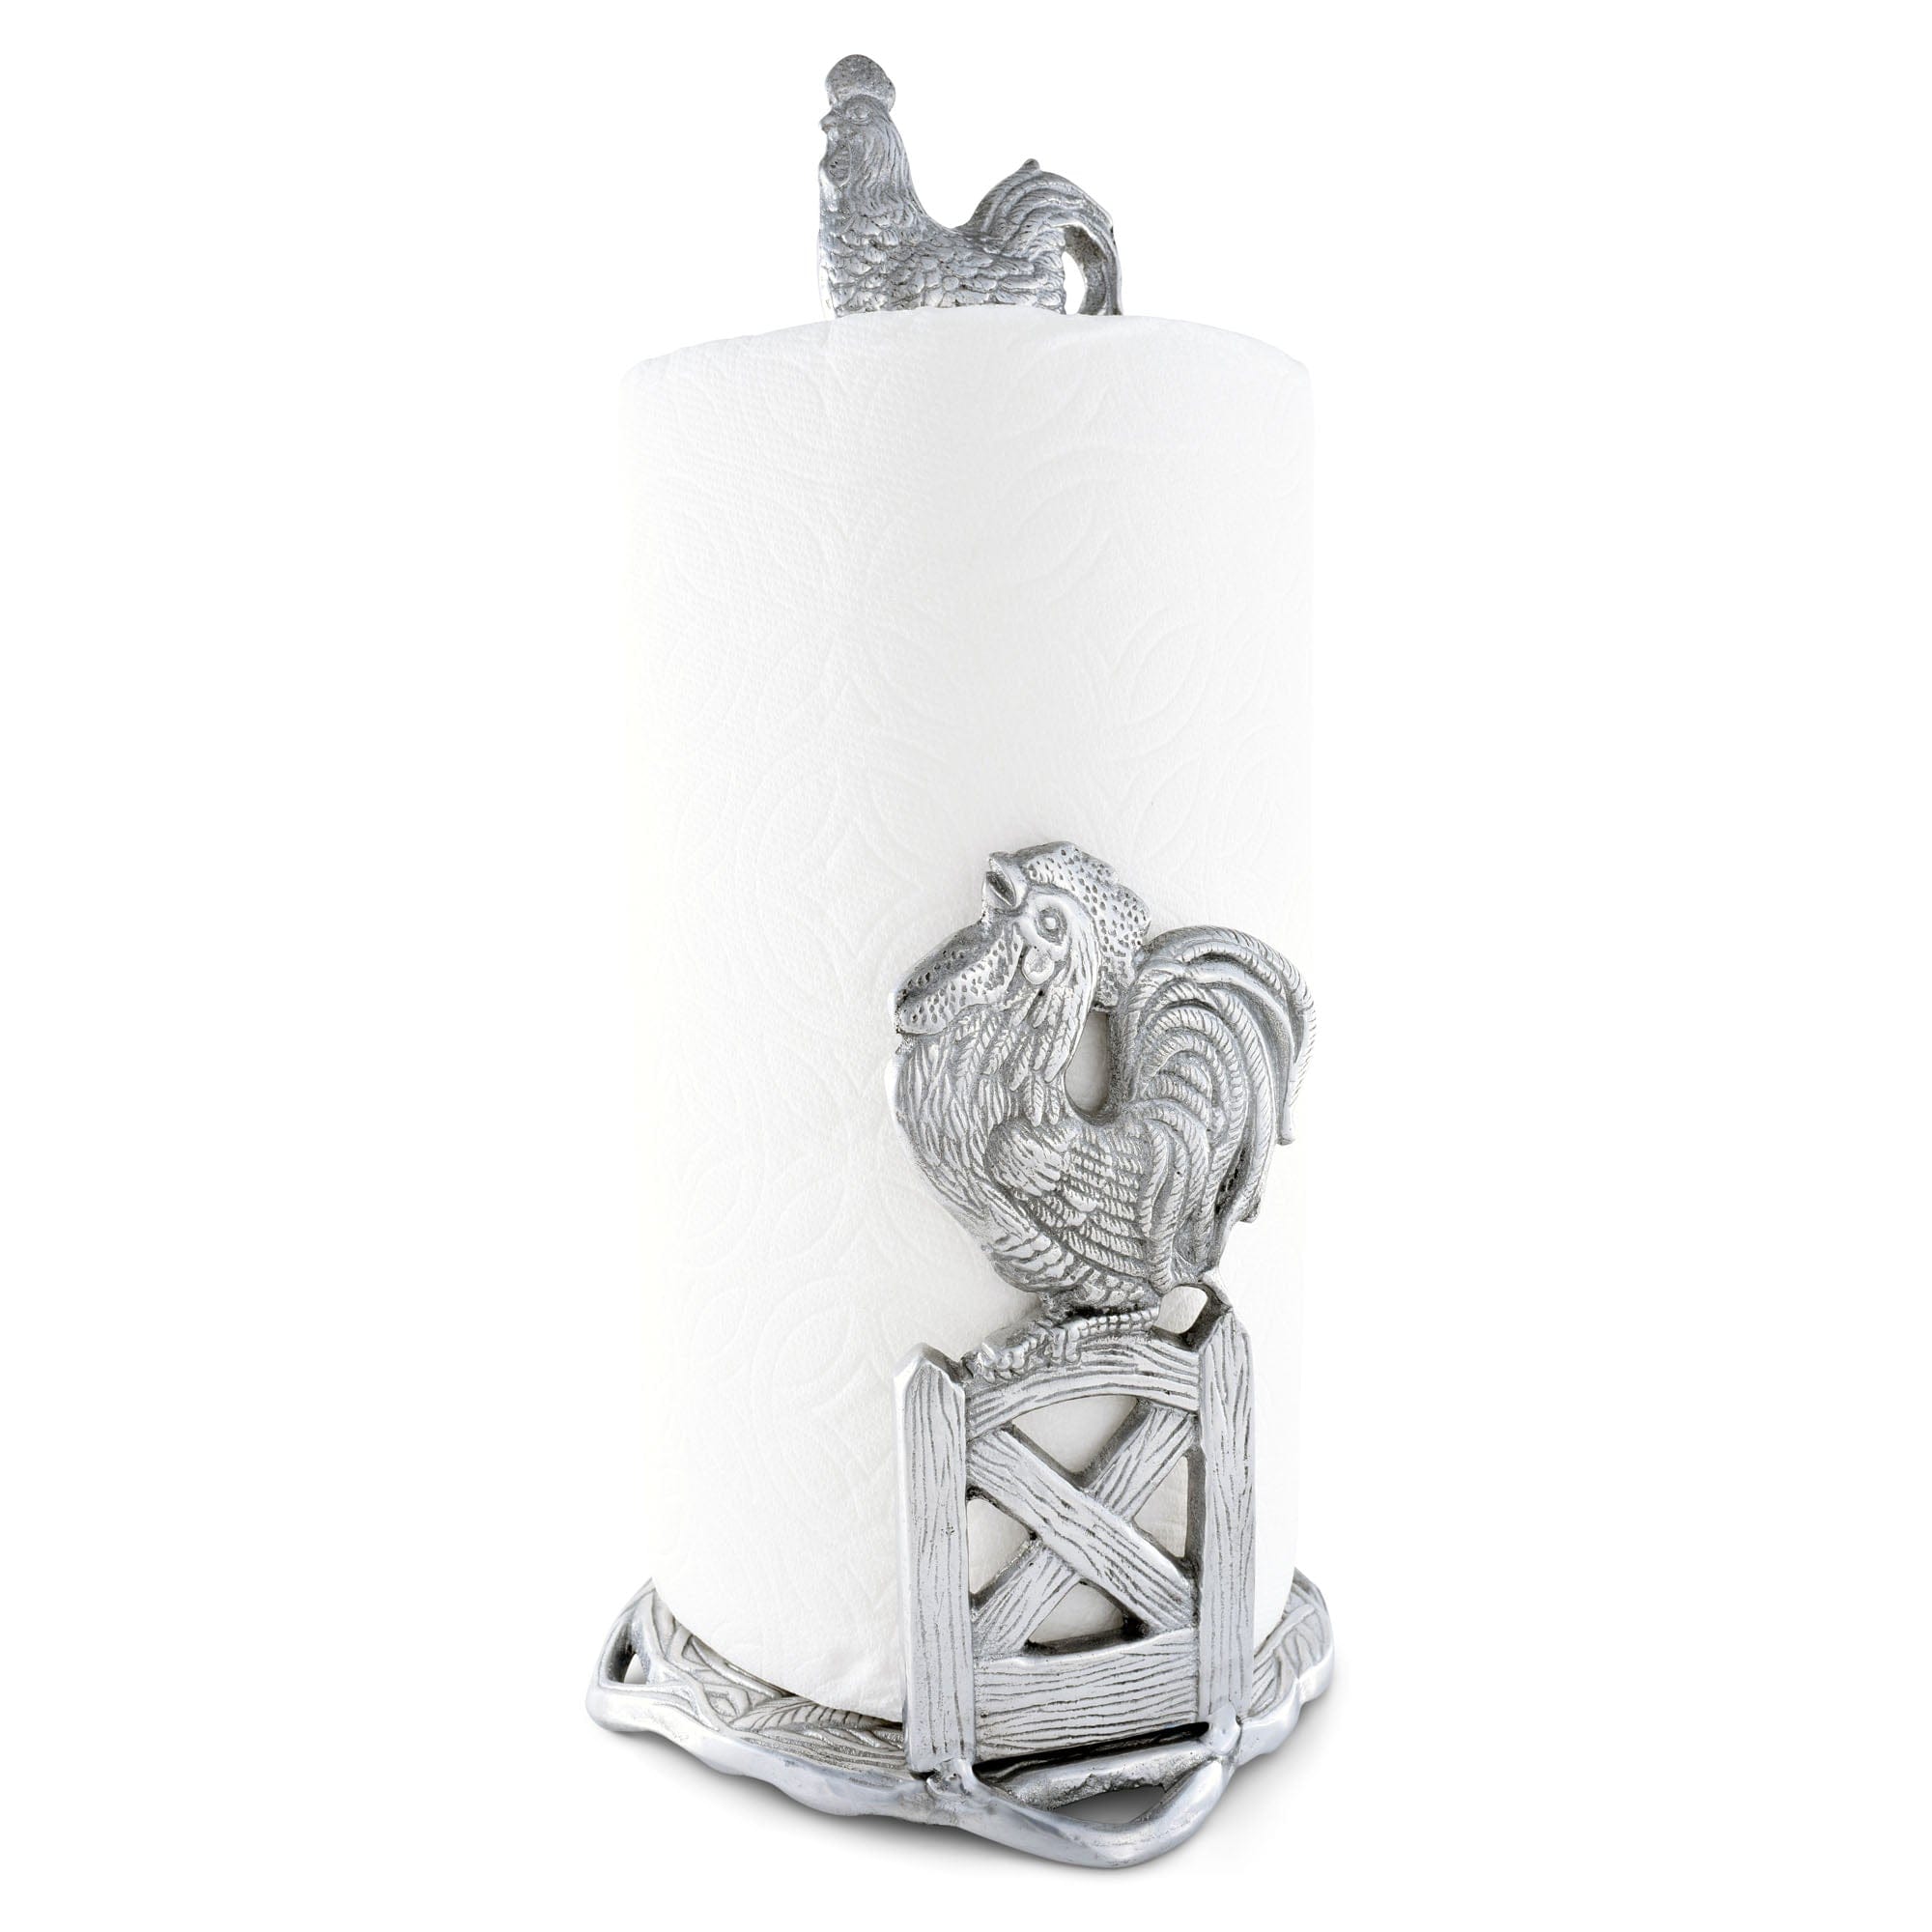 https://cdn.shopify.com/s/files/1/2081/3285/products/arthur-court-western-frontier-rooster-paper-towel-holder-550028-31867478737011_2000x.jpg?v=1678074041